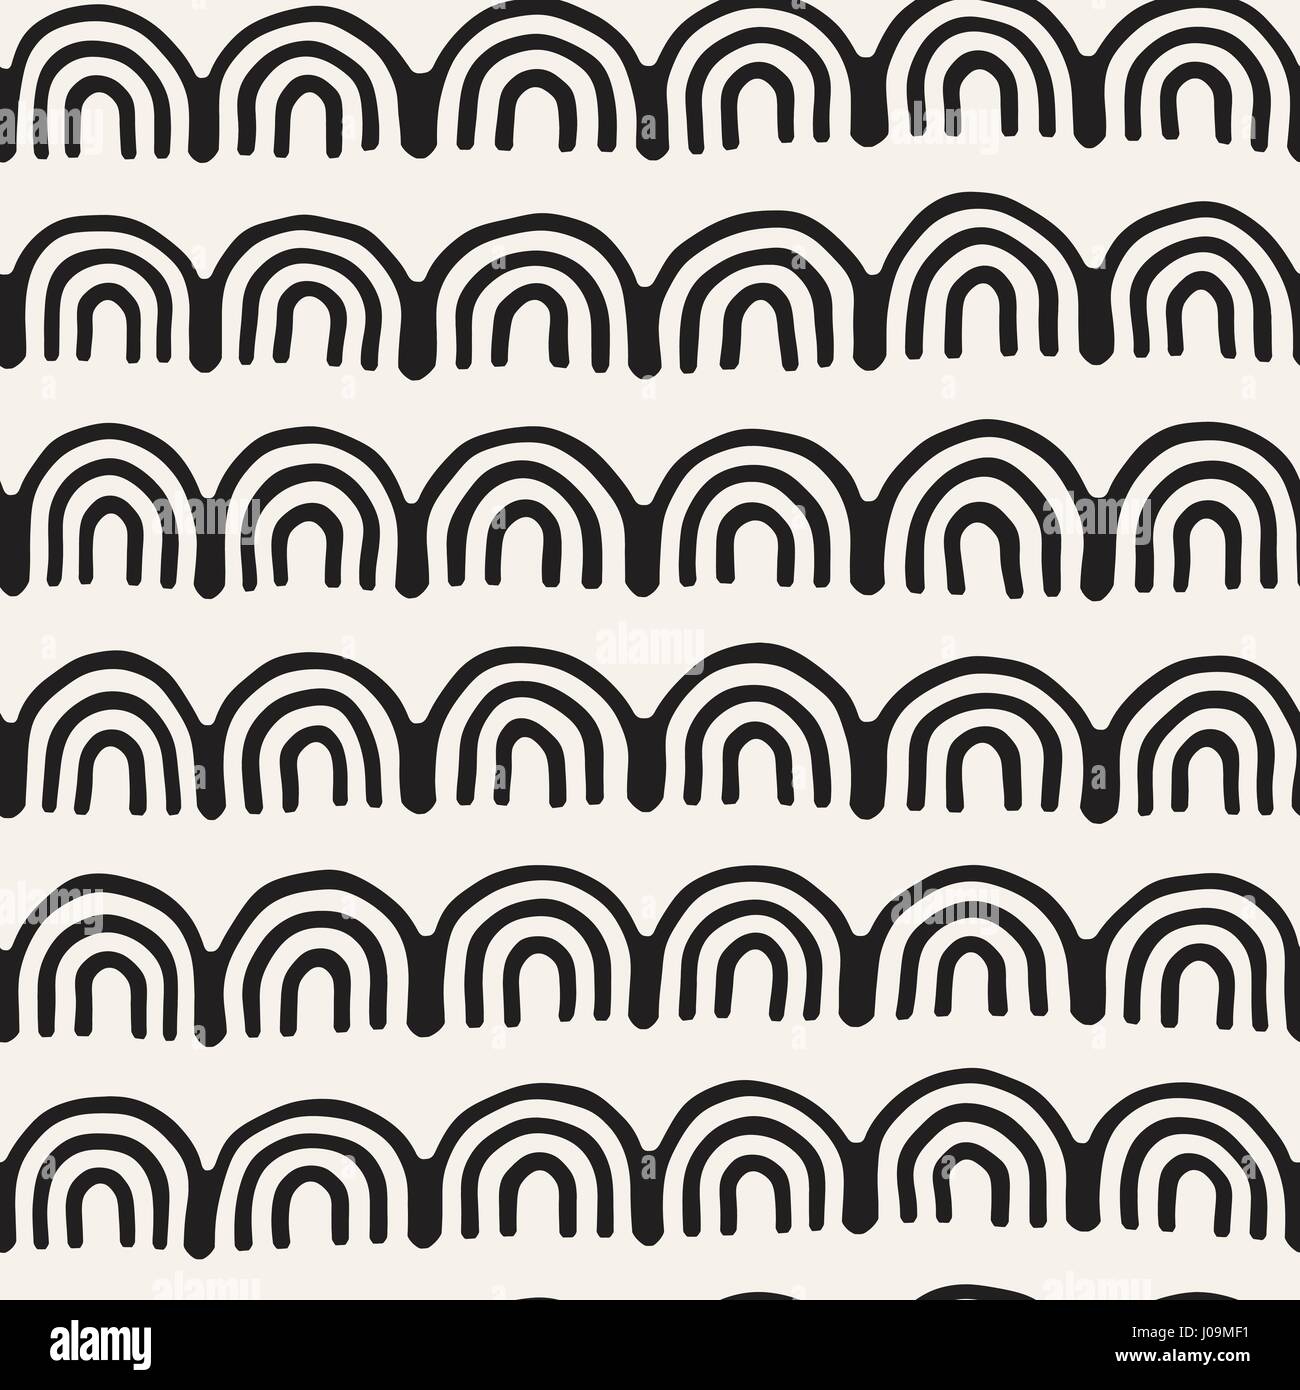 Monochrome minimalistic tribal seamless pattern with arc lines. Vector background with inky black art on white rounded stripe. Stock Vector